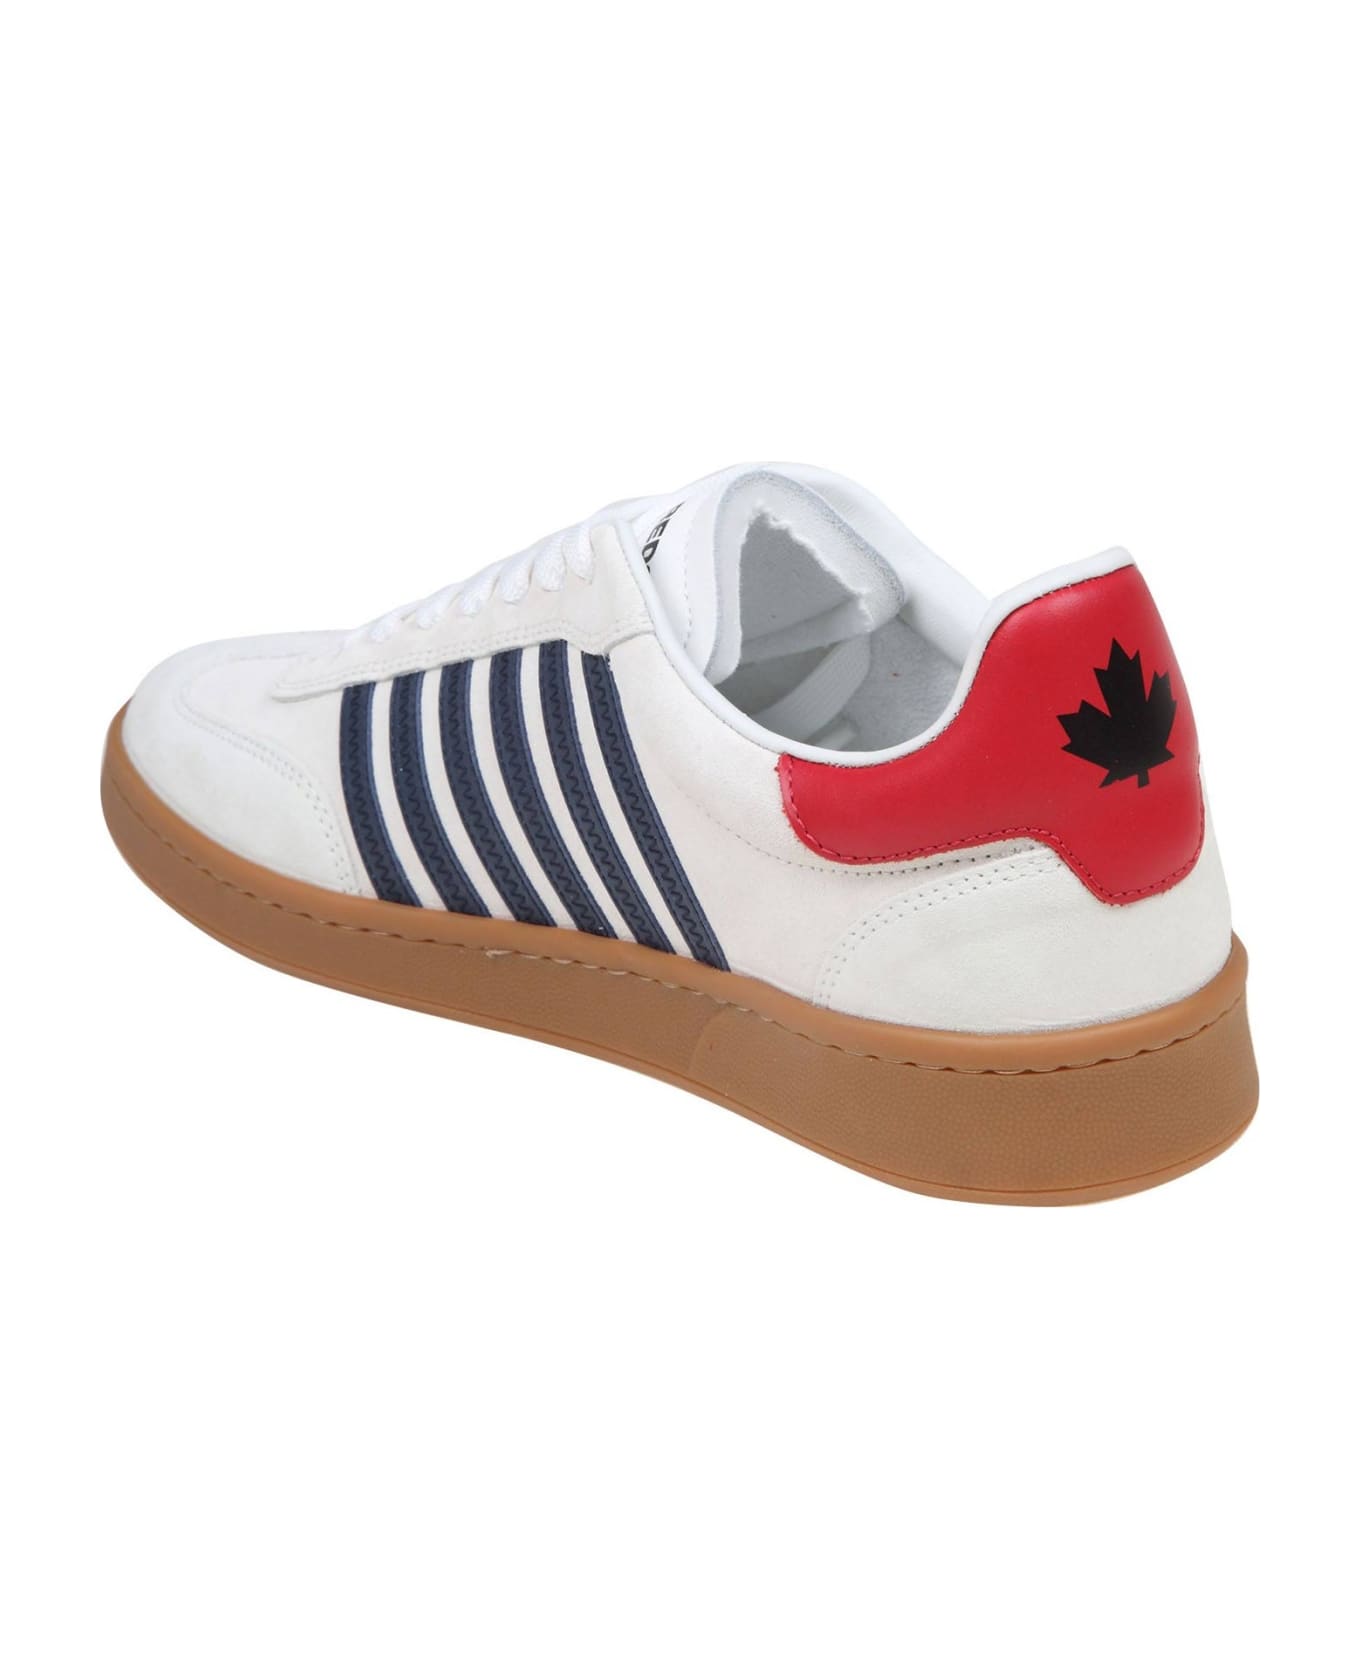 Dsquared2 Boxer Sneakers In White/blue Suede Leather - WHITE/BLU スニーカー